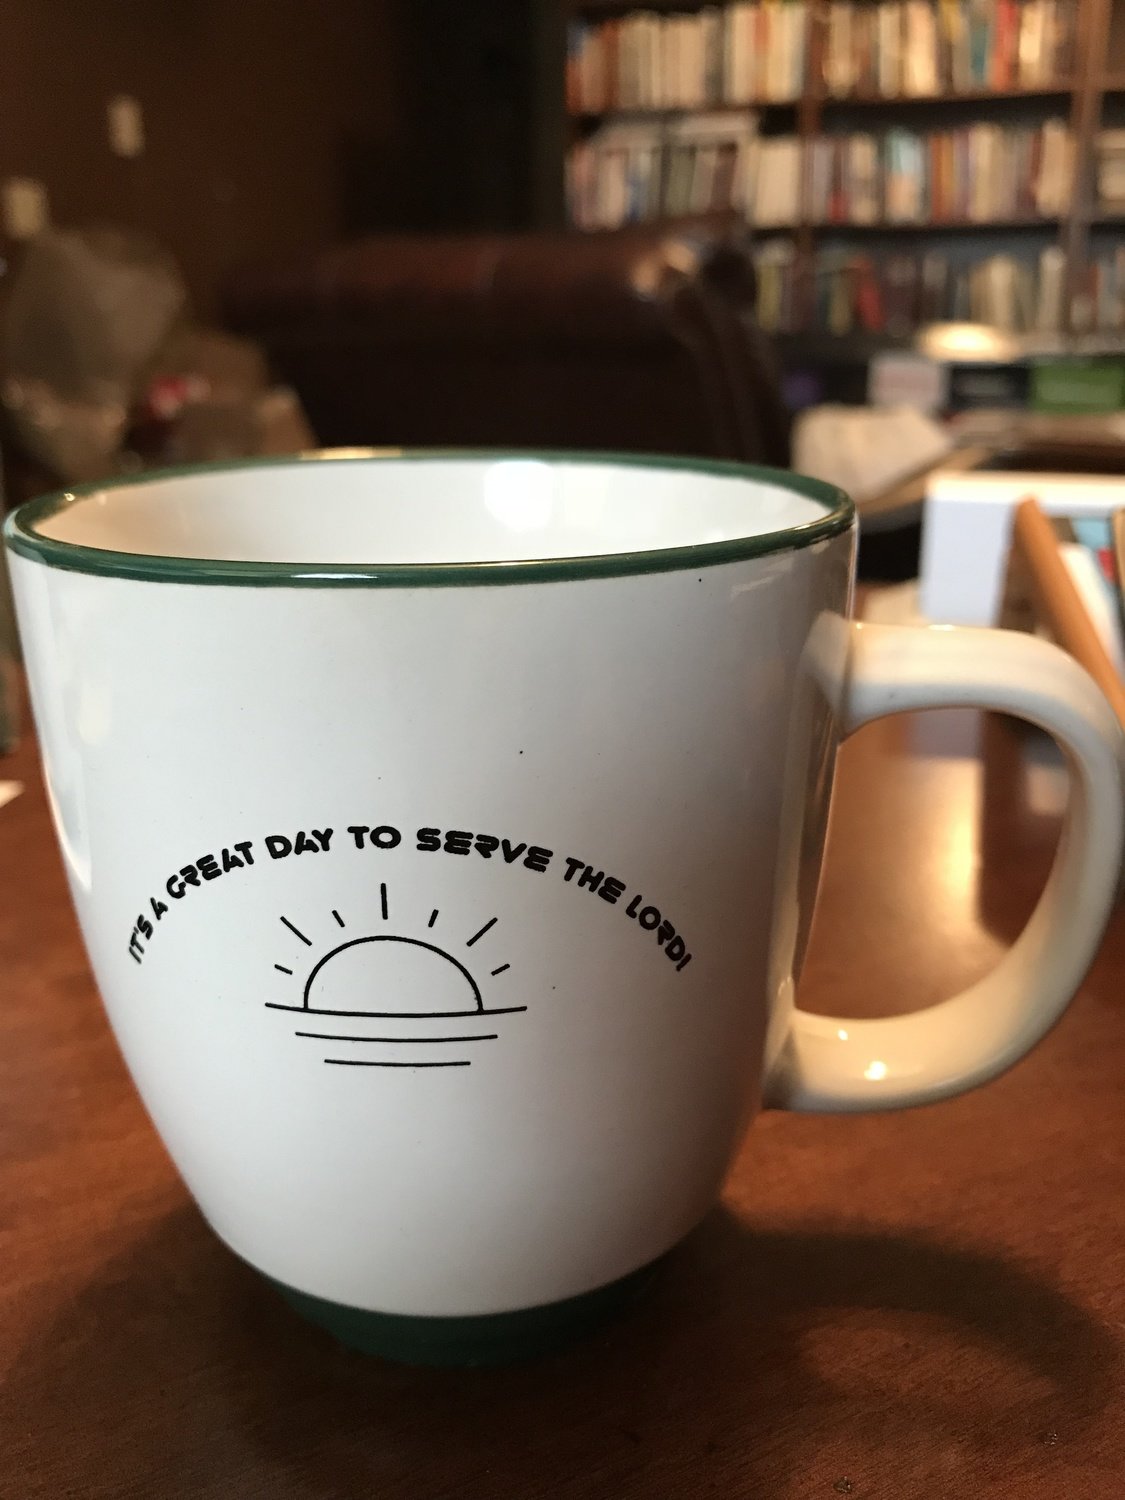 It's a Great Day to Serve the Lord! 12 oz wide mouth mug